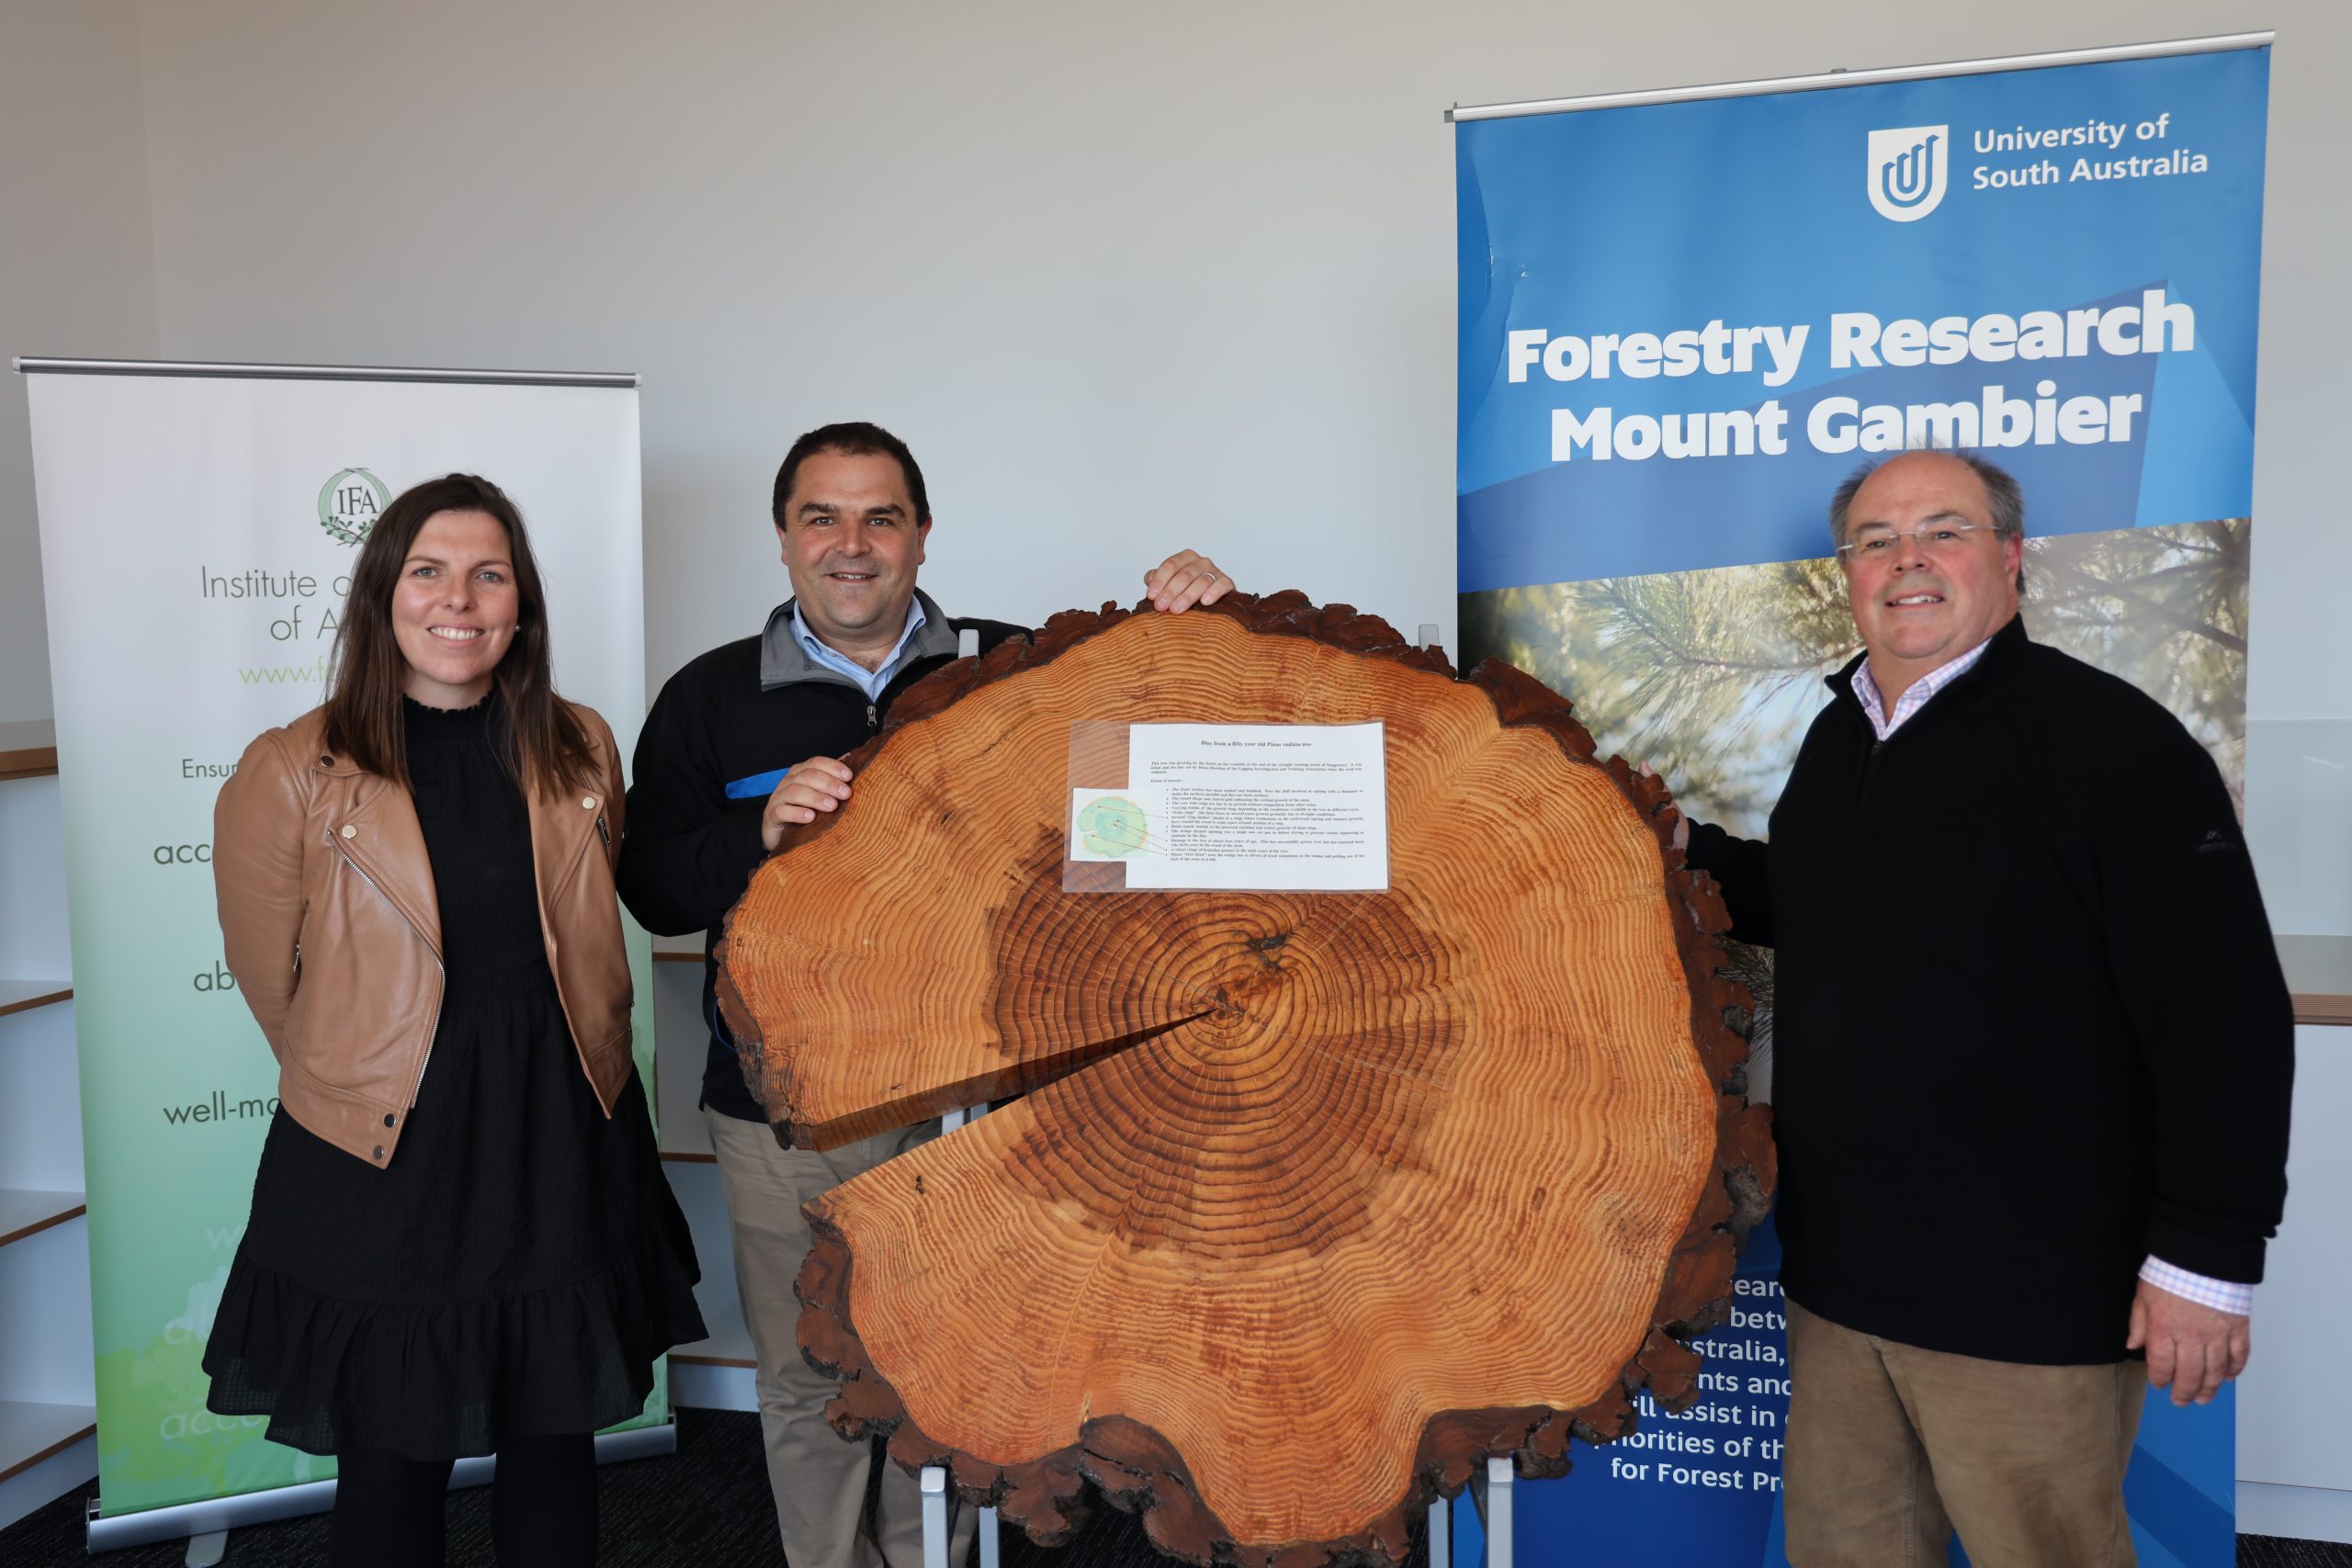 MOUNT GAMBIER FOREST CENTRE FUNDING EXTENDED